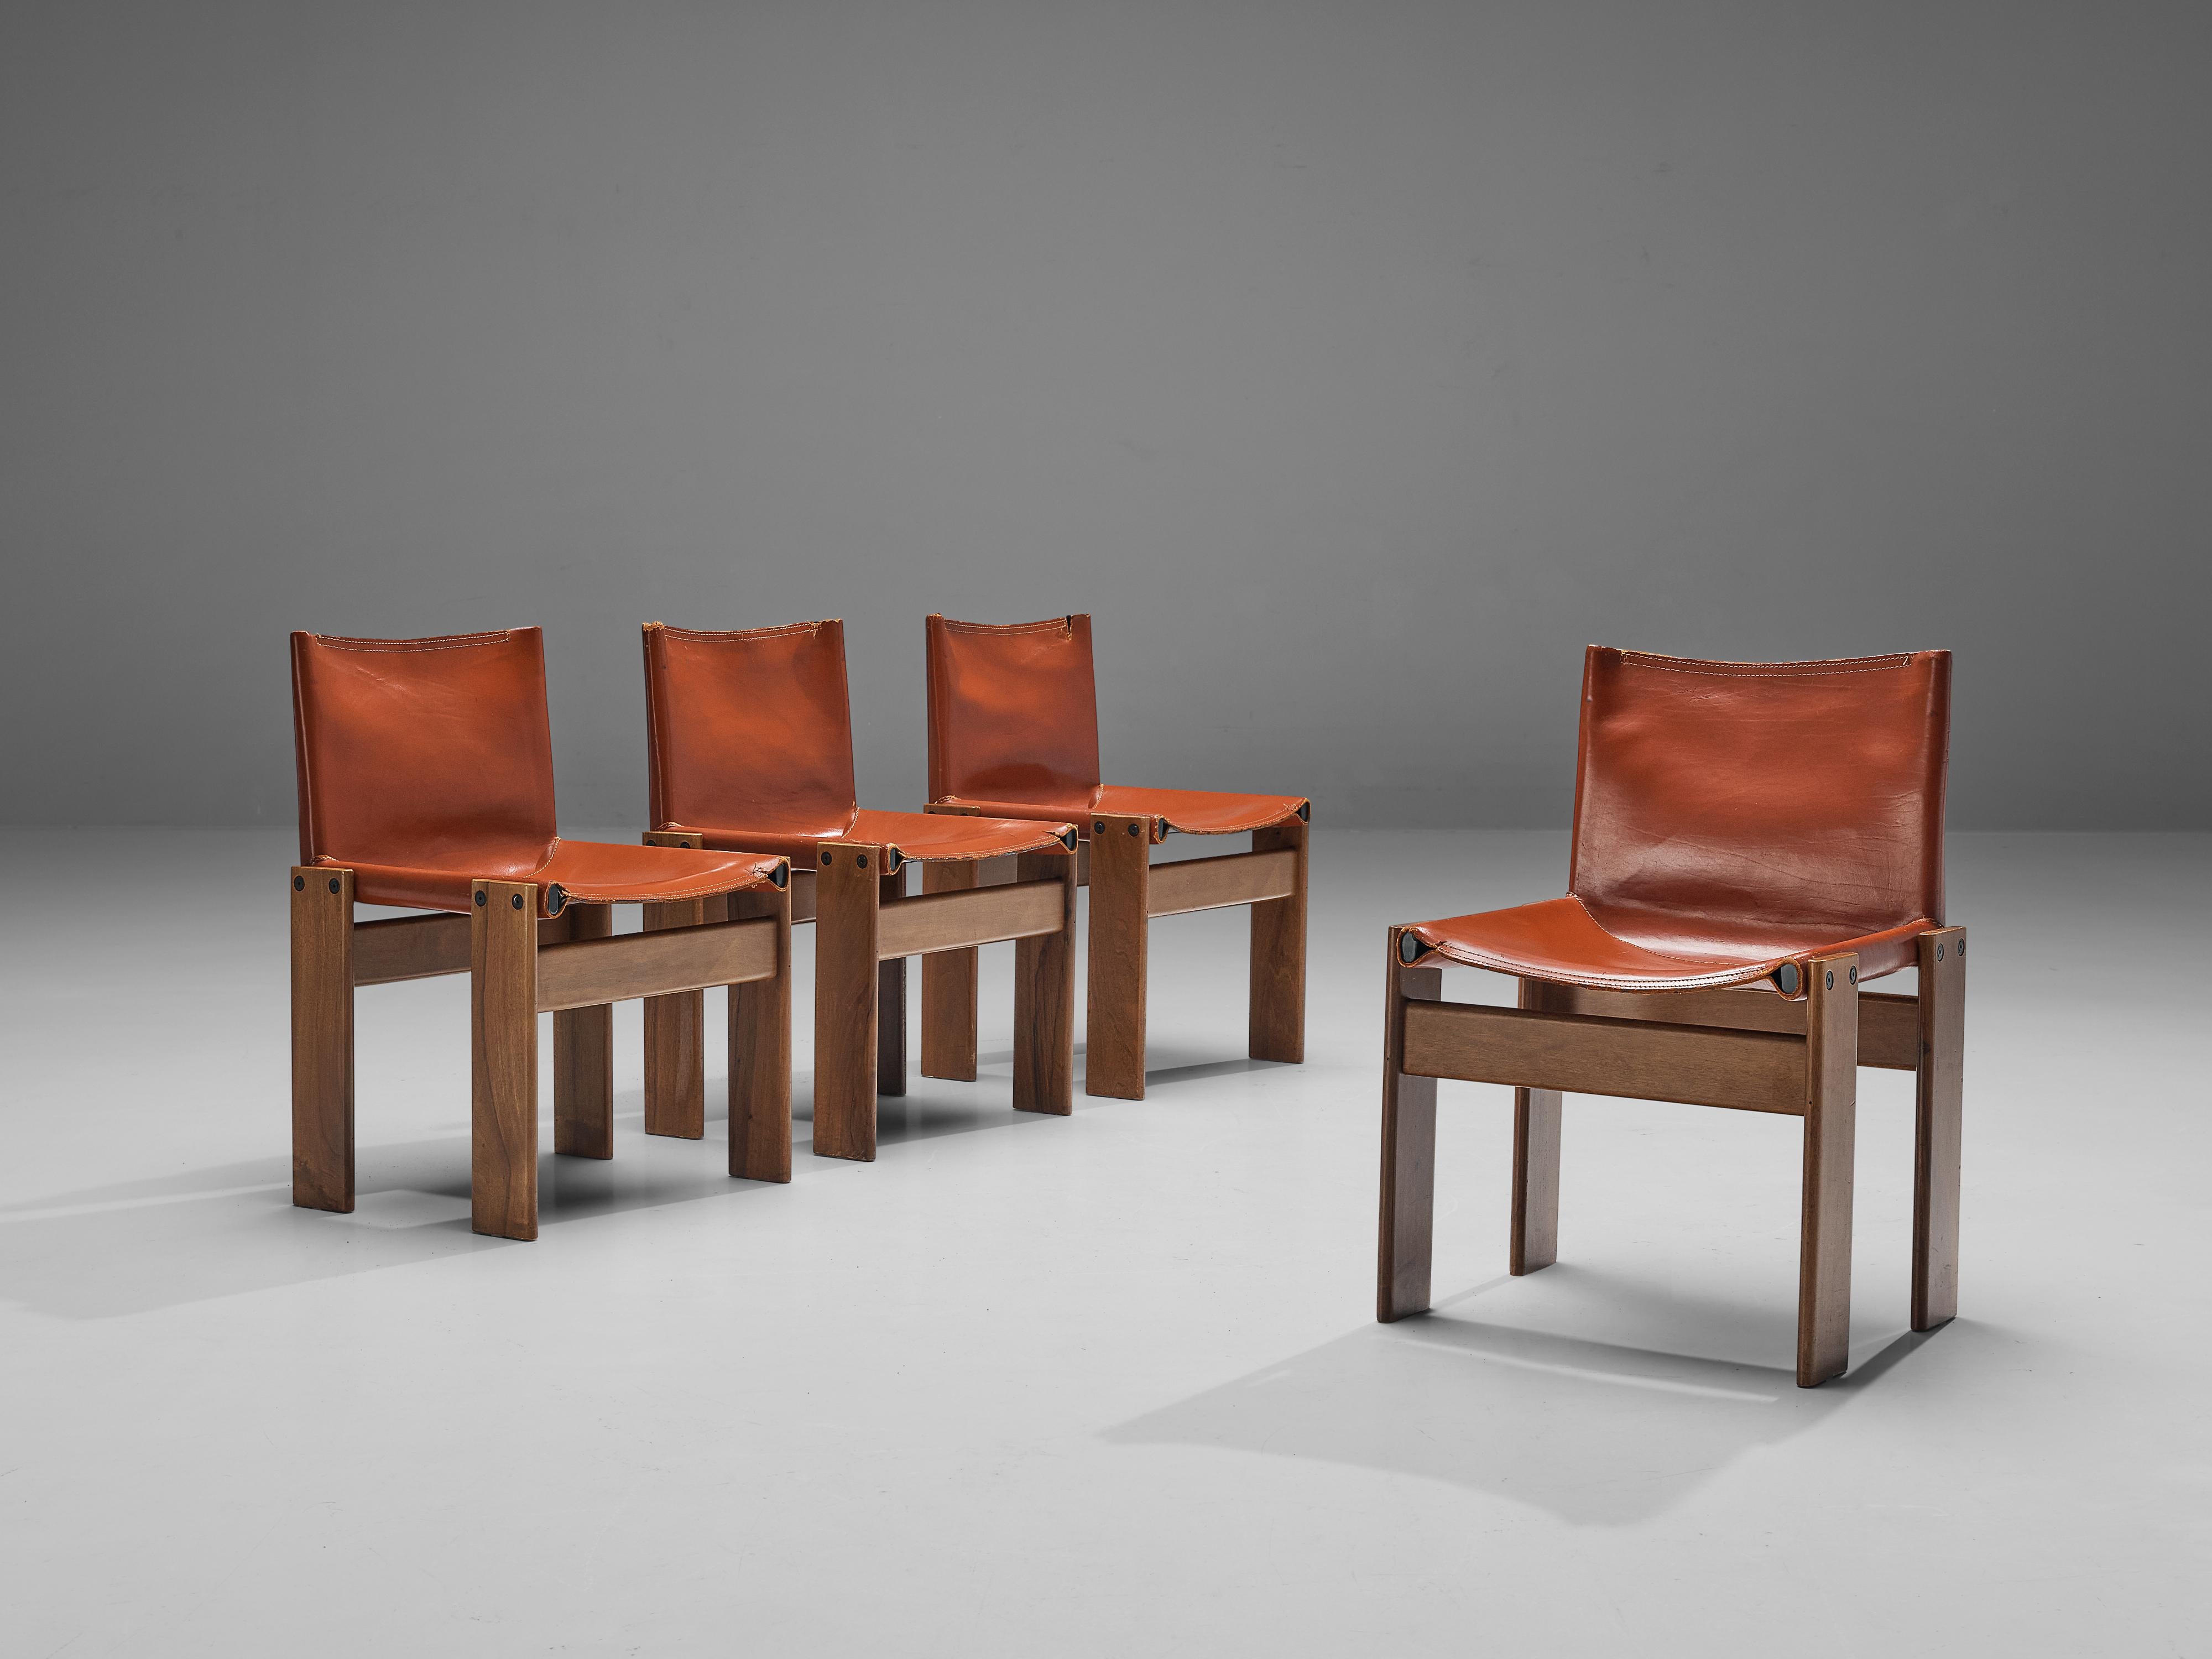 Afra & Tobia Scarpa, set of four 'Monk' dining chairs, patinated walnut and red leather, Italy, 1974.

The wonderfully red leather forms a striking combination with the vibrant orange wood. Interesting is the 'flat' shape of this chair where the